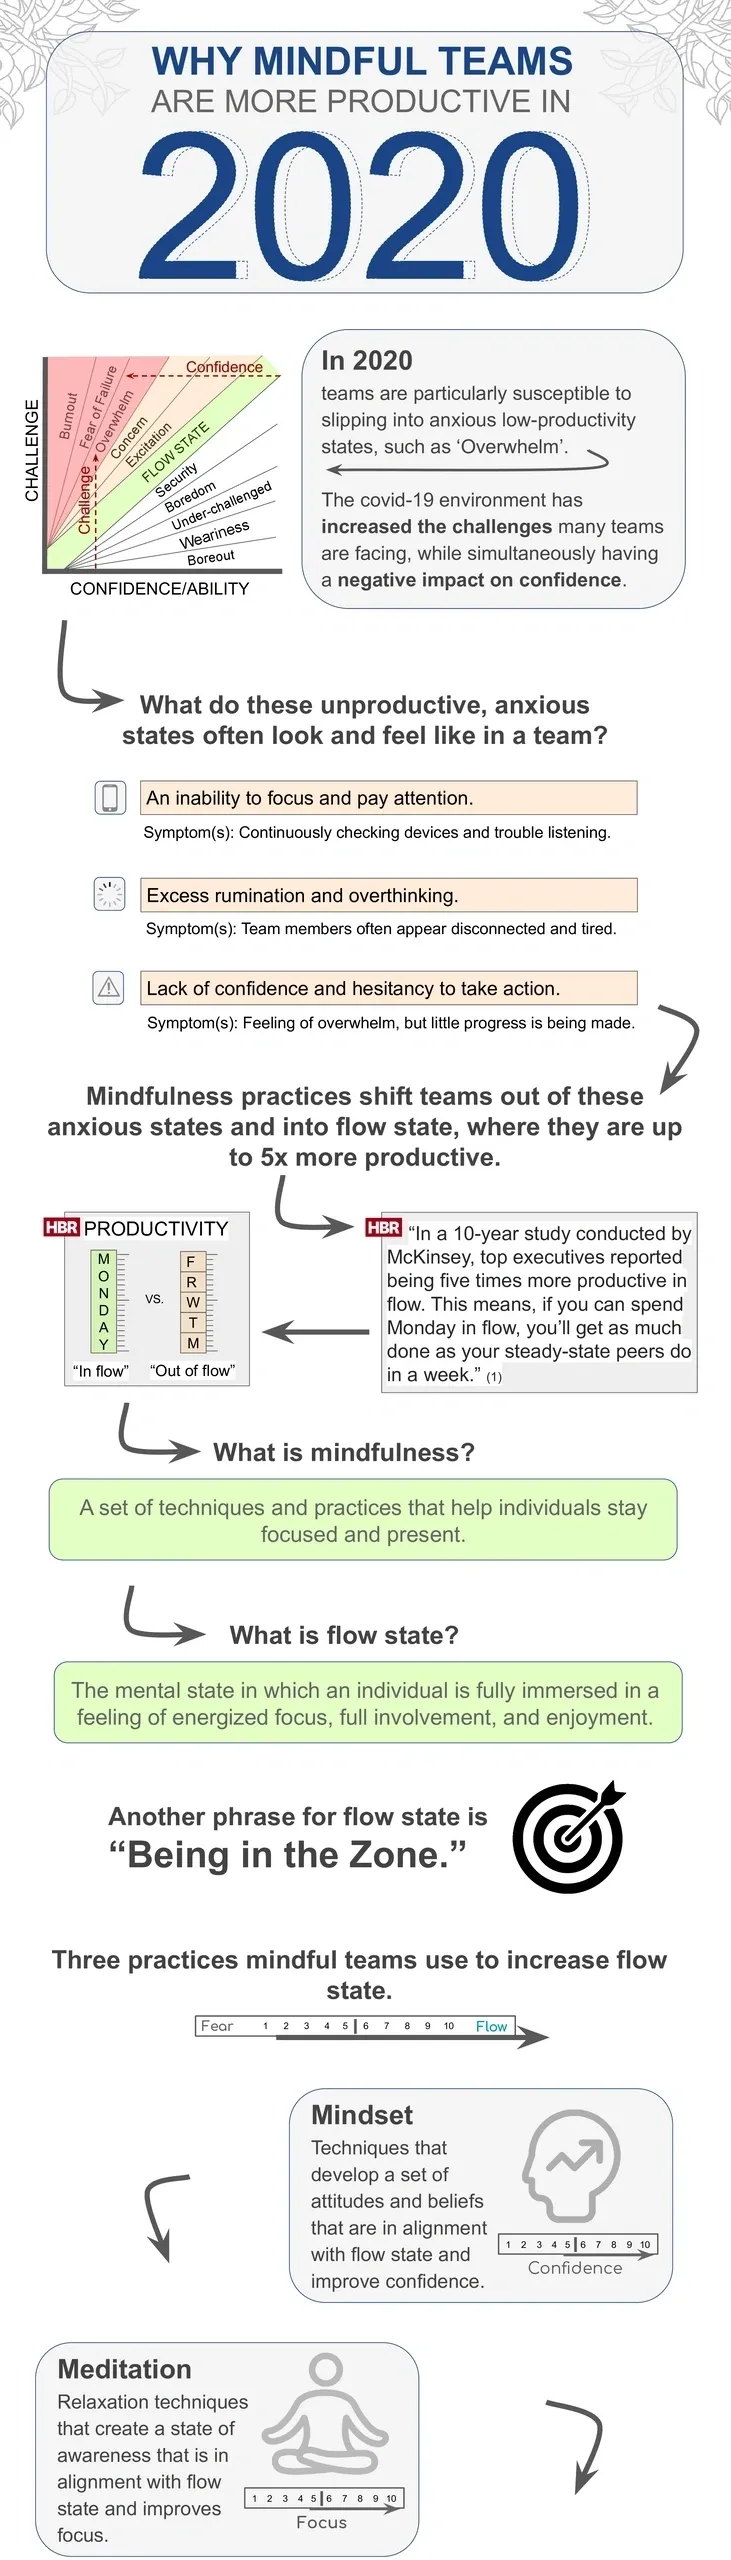 mindful teams are more productive